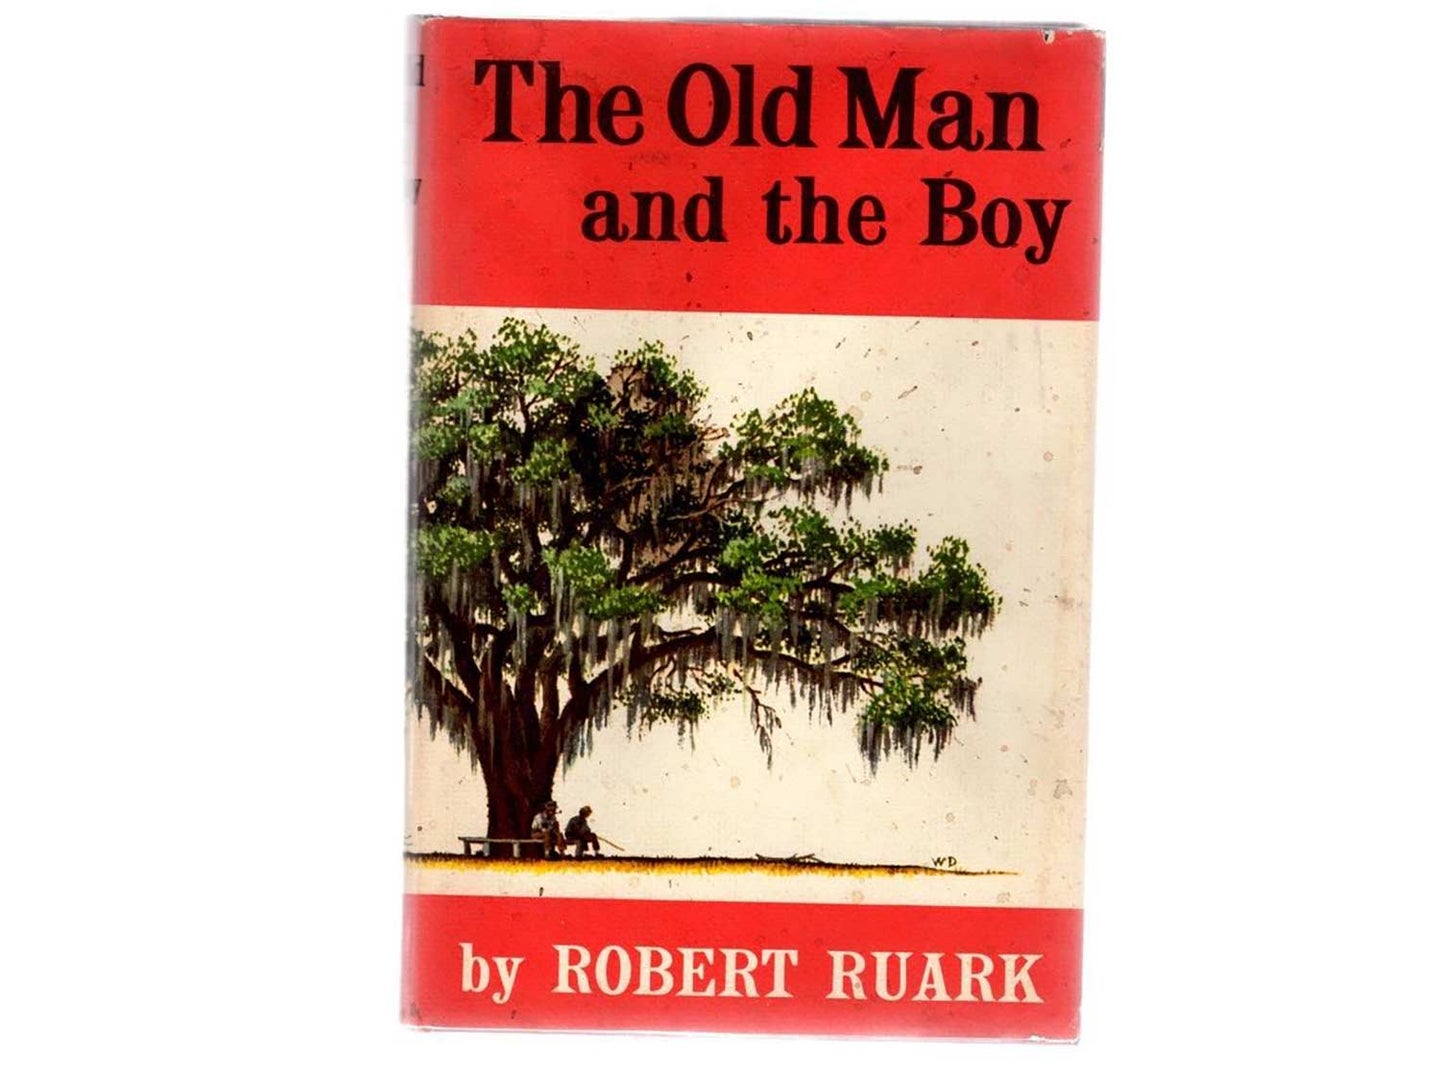 The book cover of Robert Ruark's book: The Old Man and the Boy.